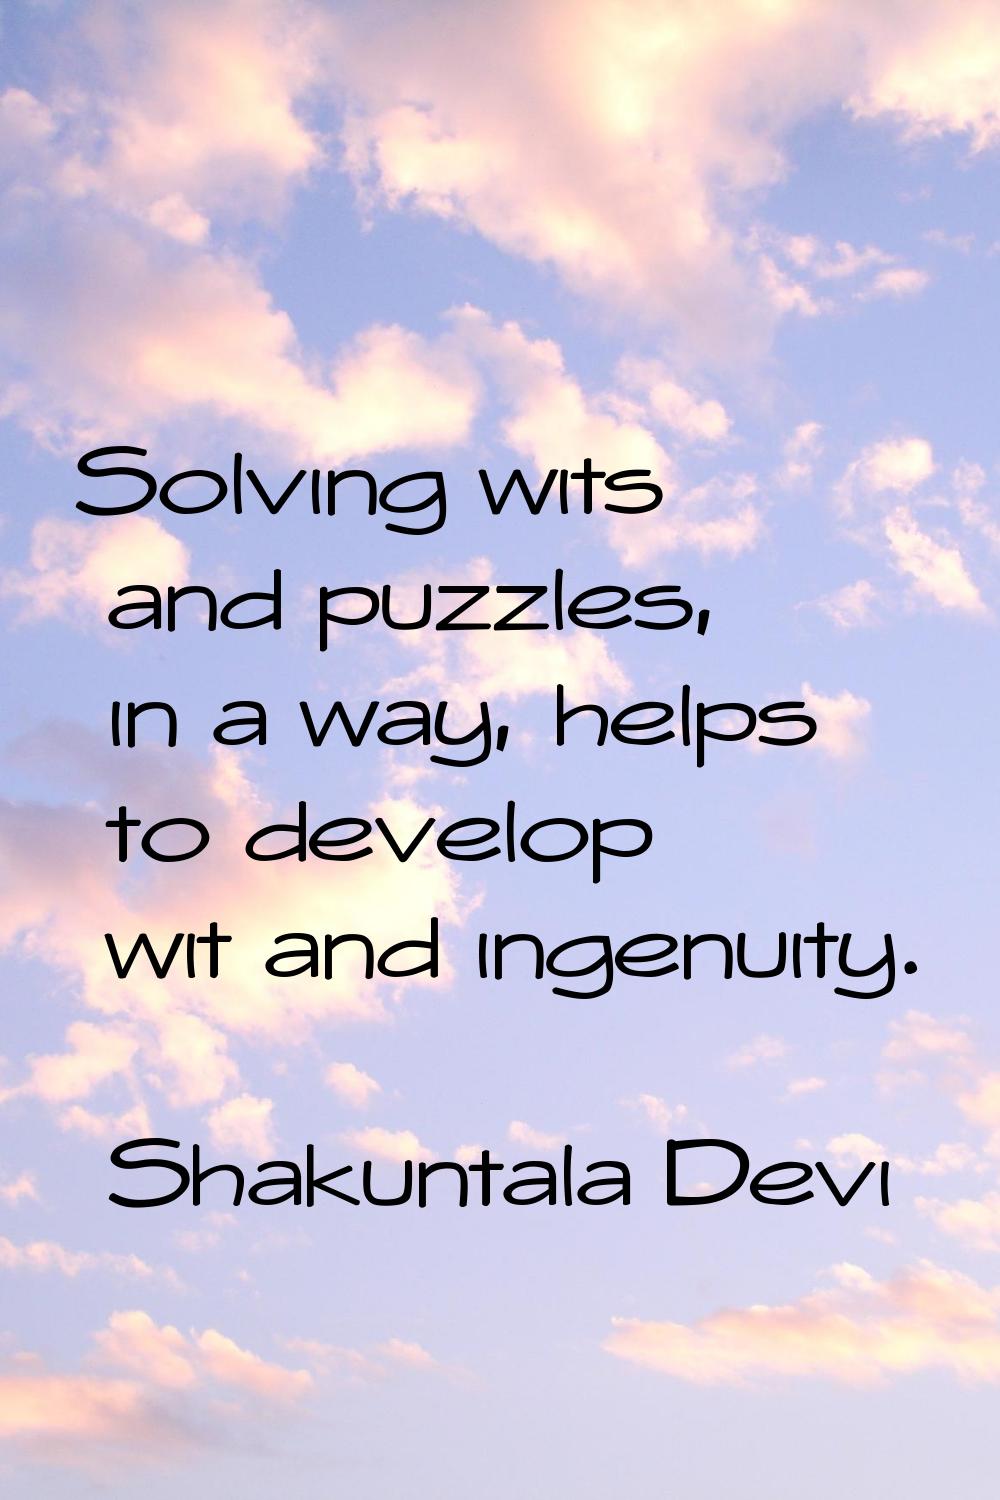 Solving wits and puzzles, in a way, helps to develop wit and ingenuity.